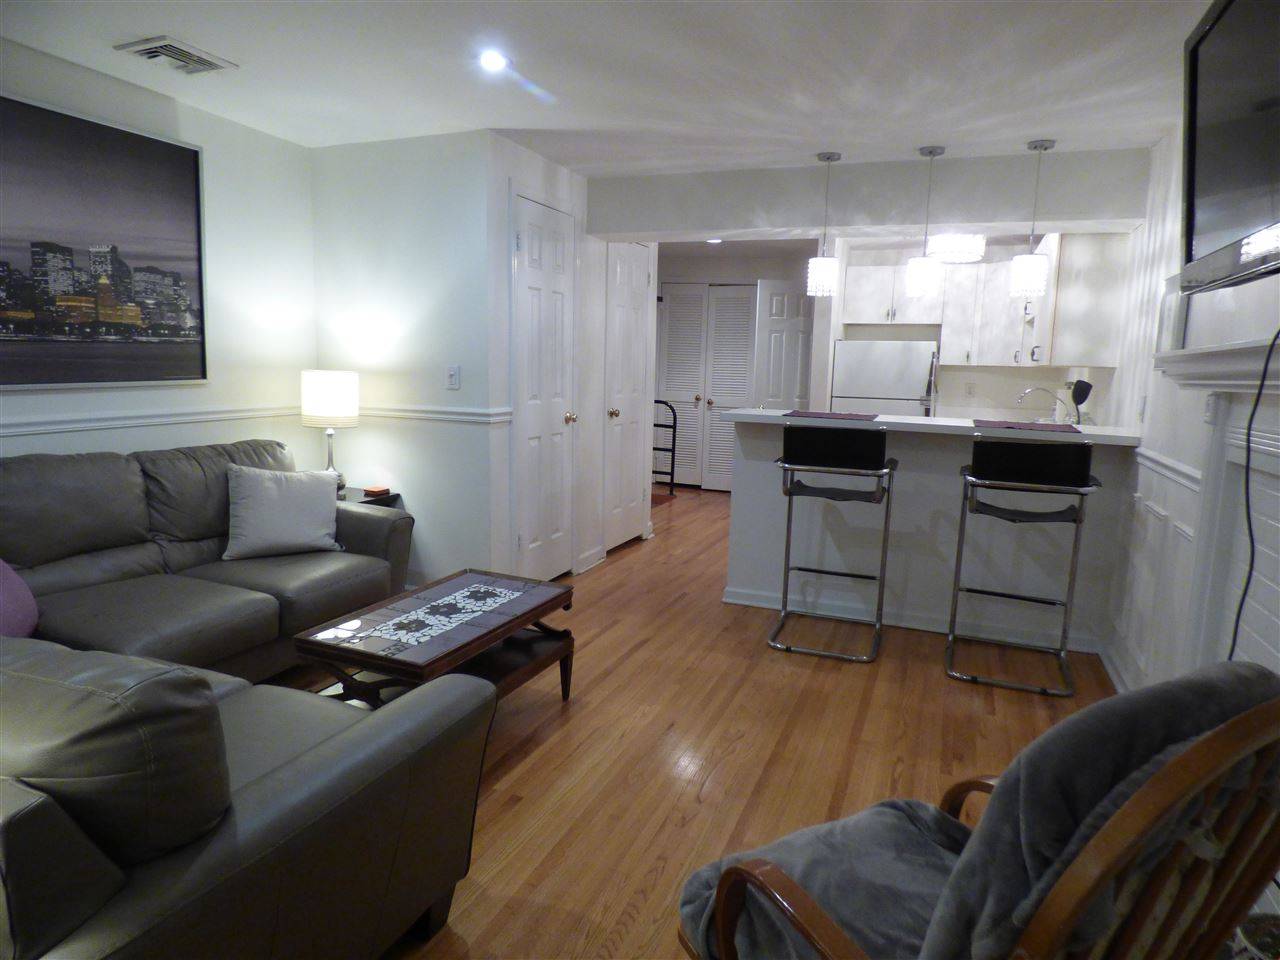 Hoboken life made simple - 1 BR New Jersey